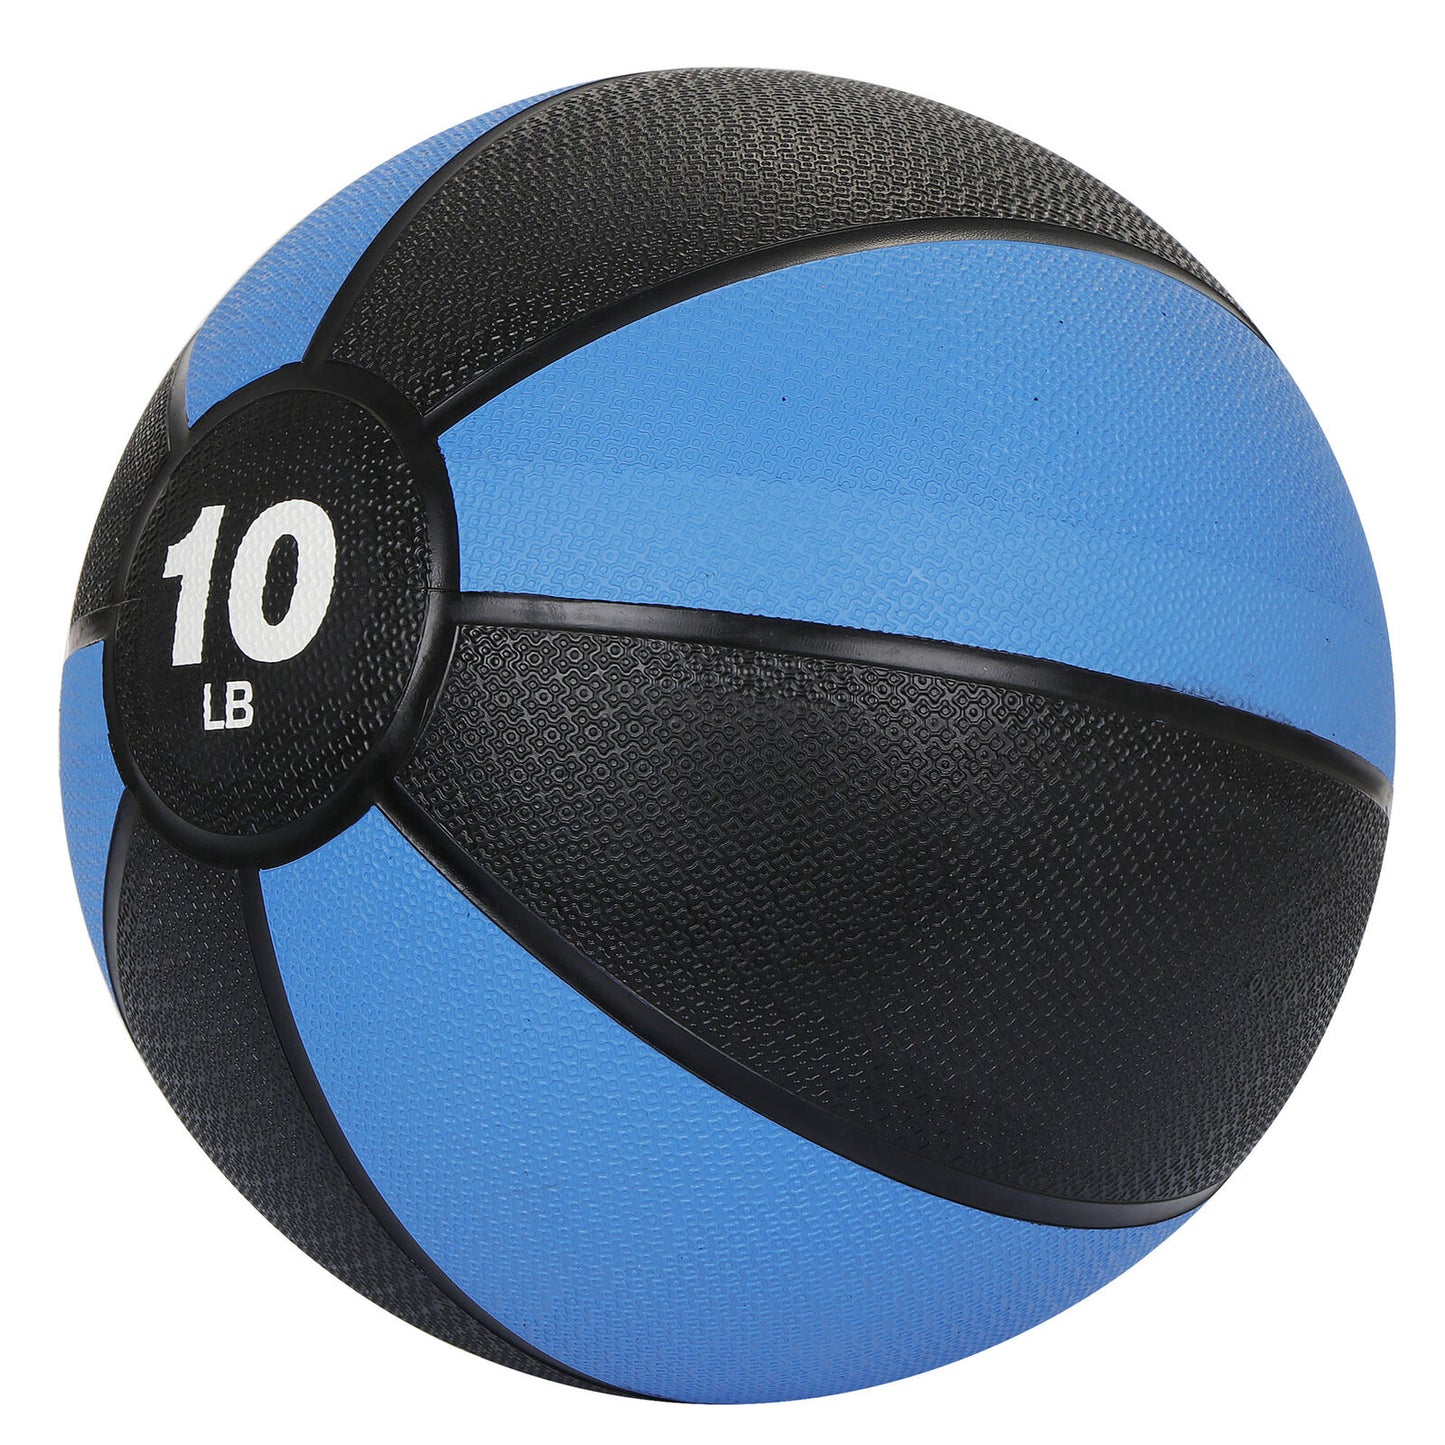 Pro Workout Weighted Easy Grip Medicine Ball Body Balance Sport Equipment  10lbs